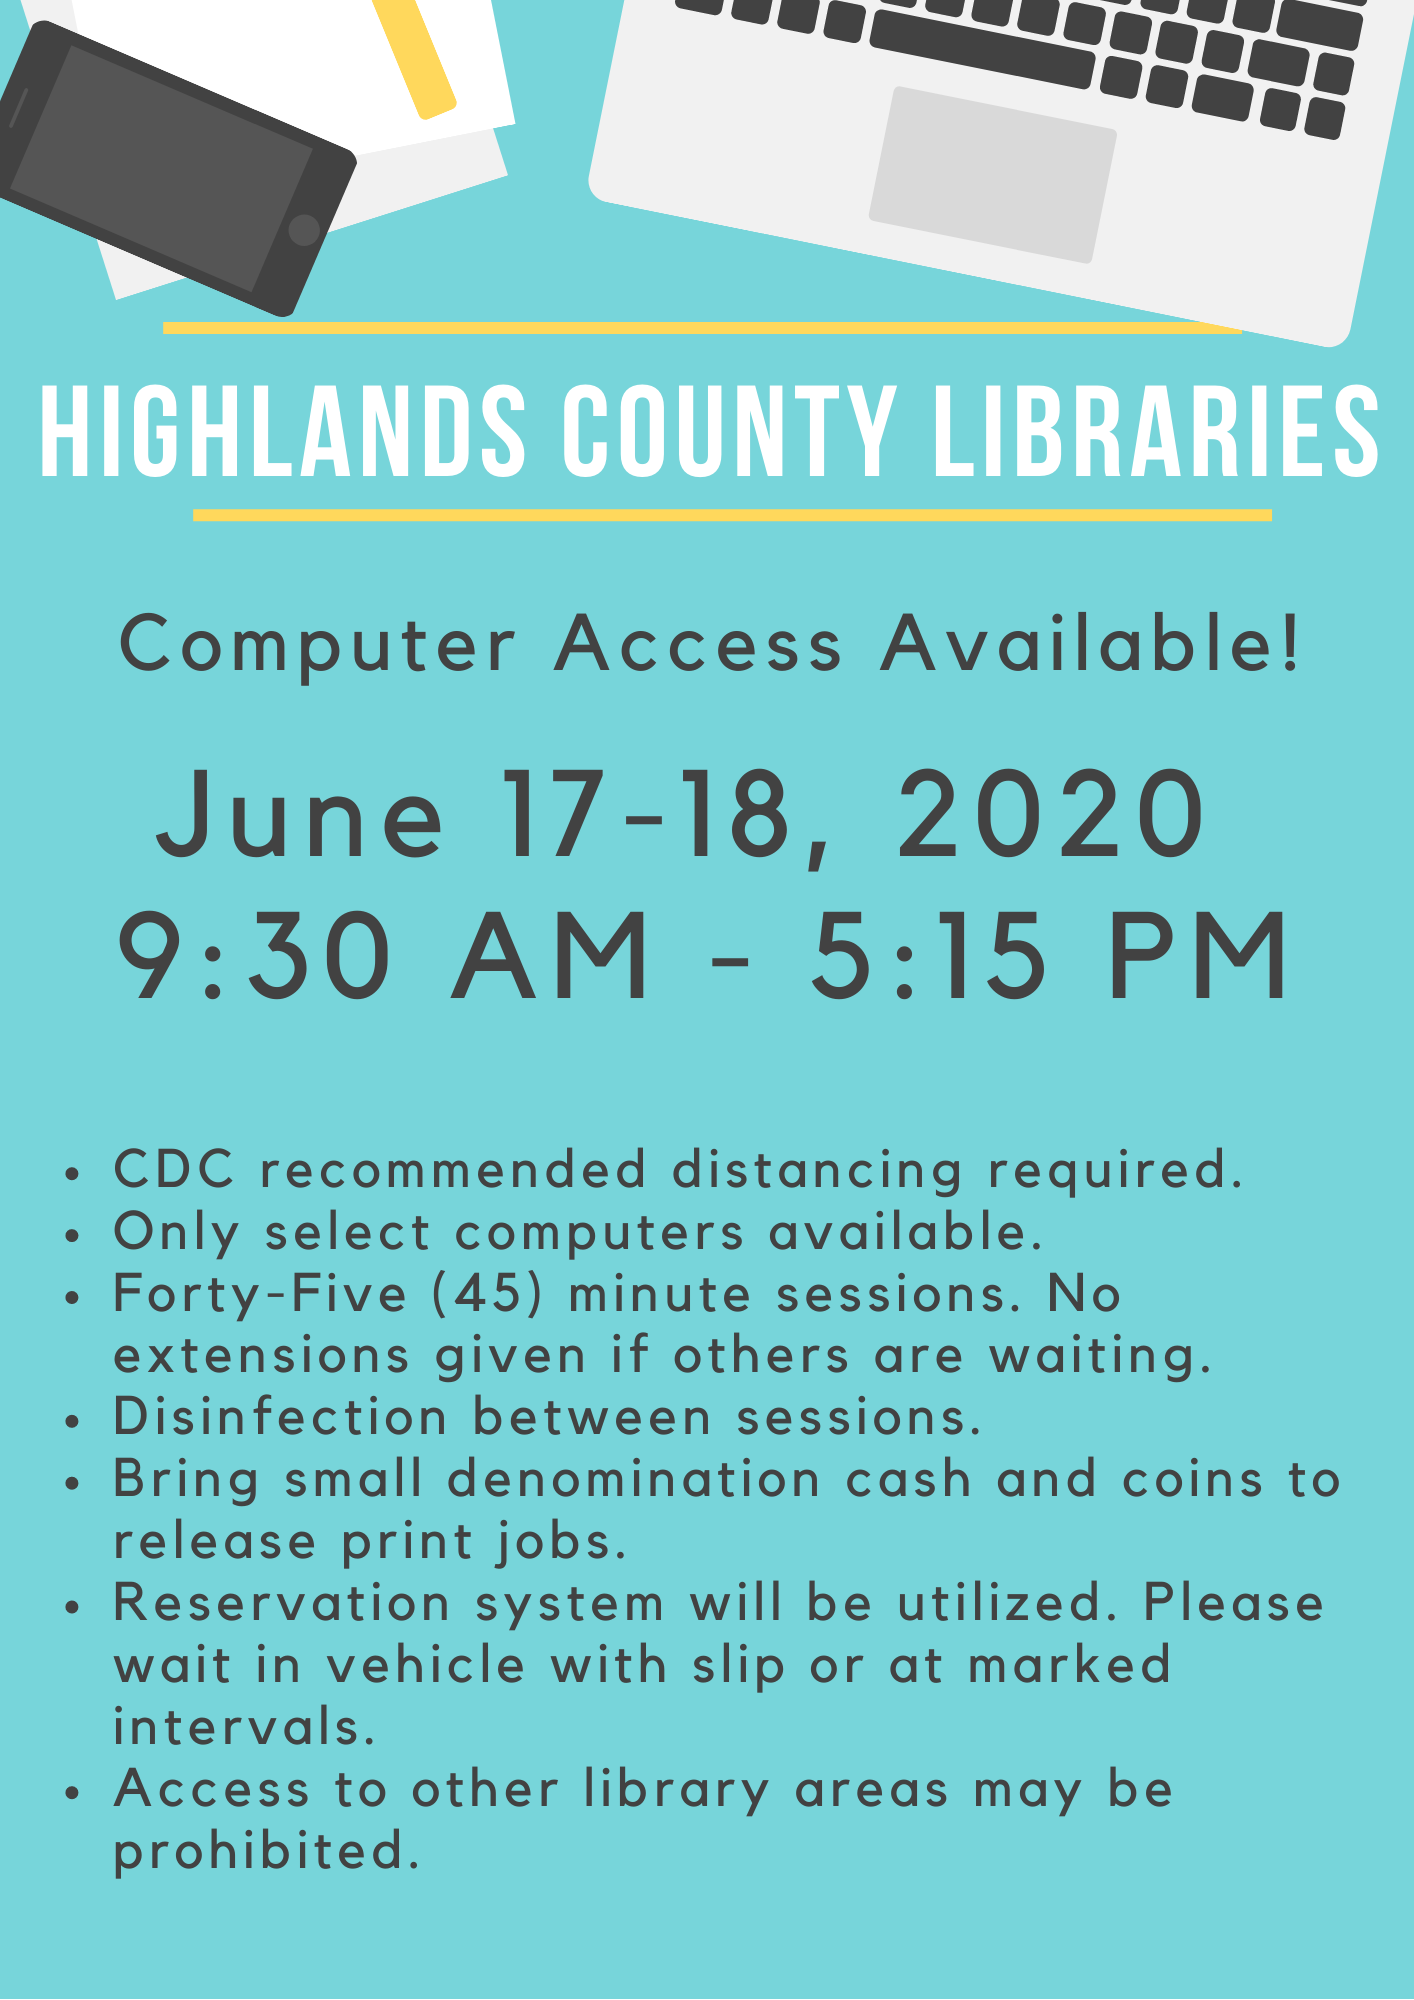 TODAY & TOMORROW: Highlands County Public Libraries will be offering computer usage on June 17-18, 2020 from 9:30 AM to 5:15 PM. Computers will automatically log off at 5:15 PM. Sessions will be limited to 45 minutes. Social distancing lines will be marked on the sidewalk if you choose to wait there, and if not please wait in your vehicle with a reservation slip. Some areas of the libraries will be closed and not available for use or access. Computer service available at Avon Park, Sebring, and Lake Placid Libraries. Please call your branch for questions or assistance. Avon Park is 863-452-3803, Sebring is 863-402-6716, and Lake Placid is 863-699-3705.